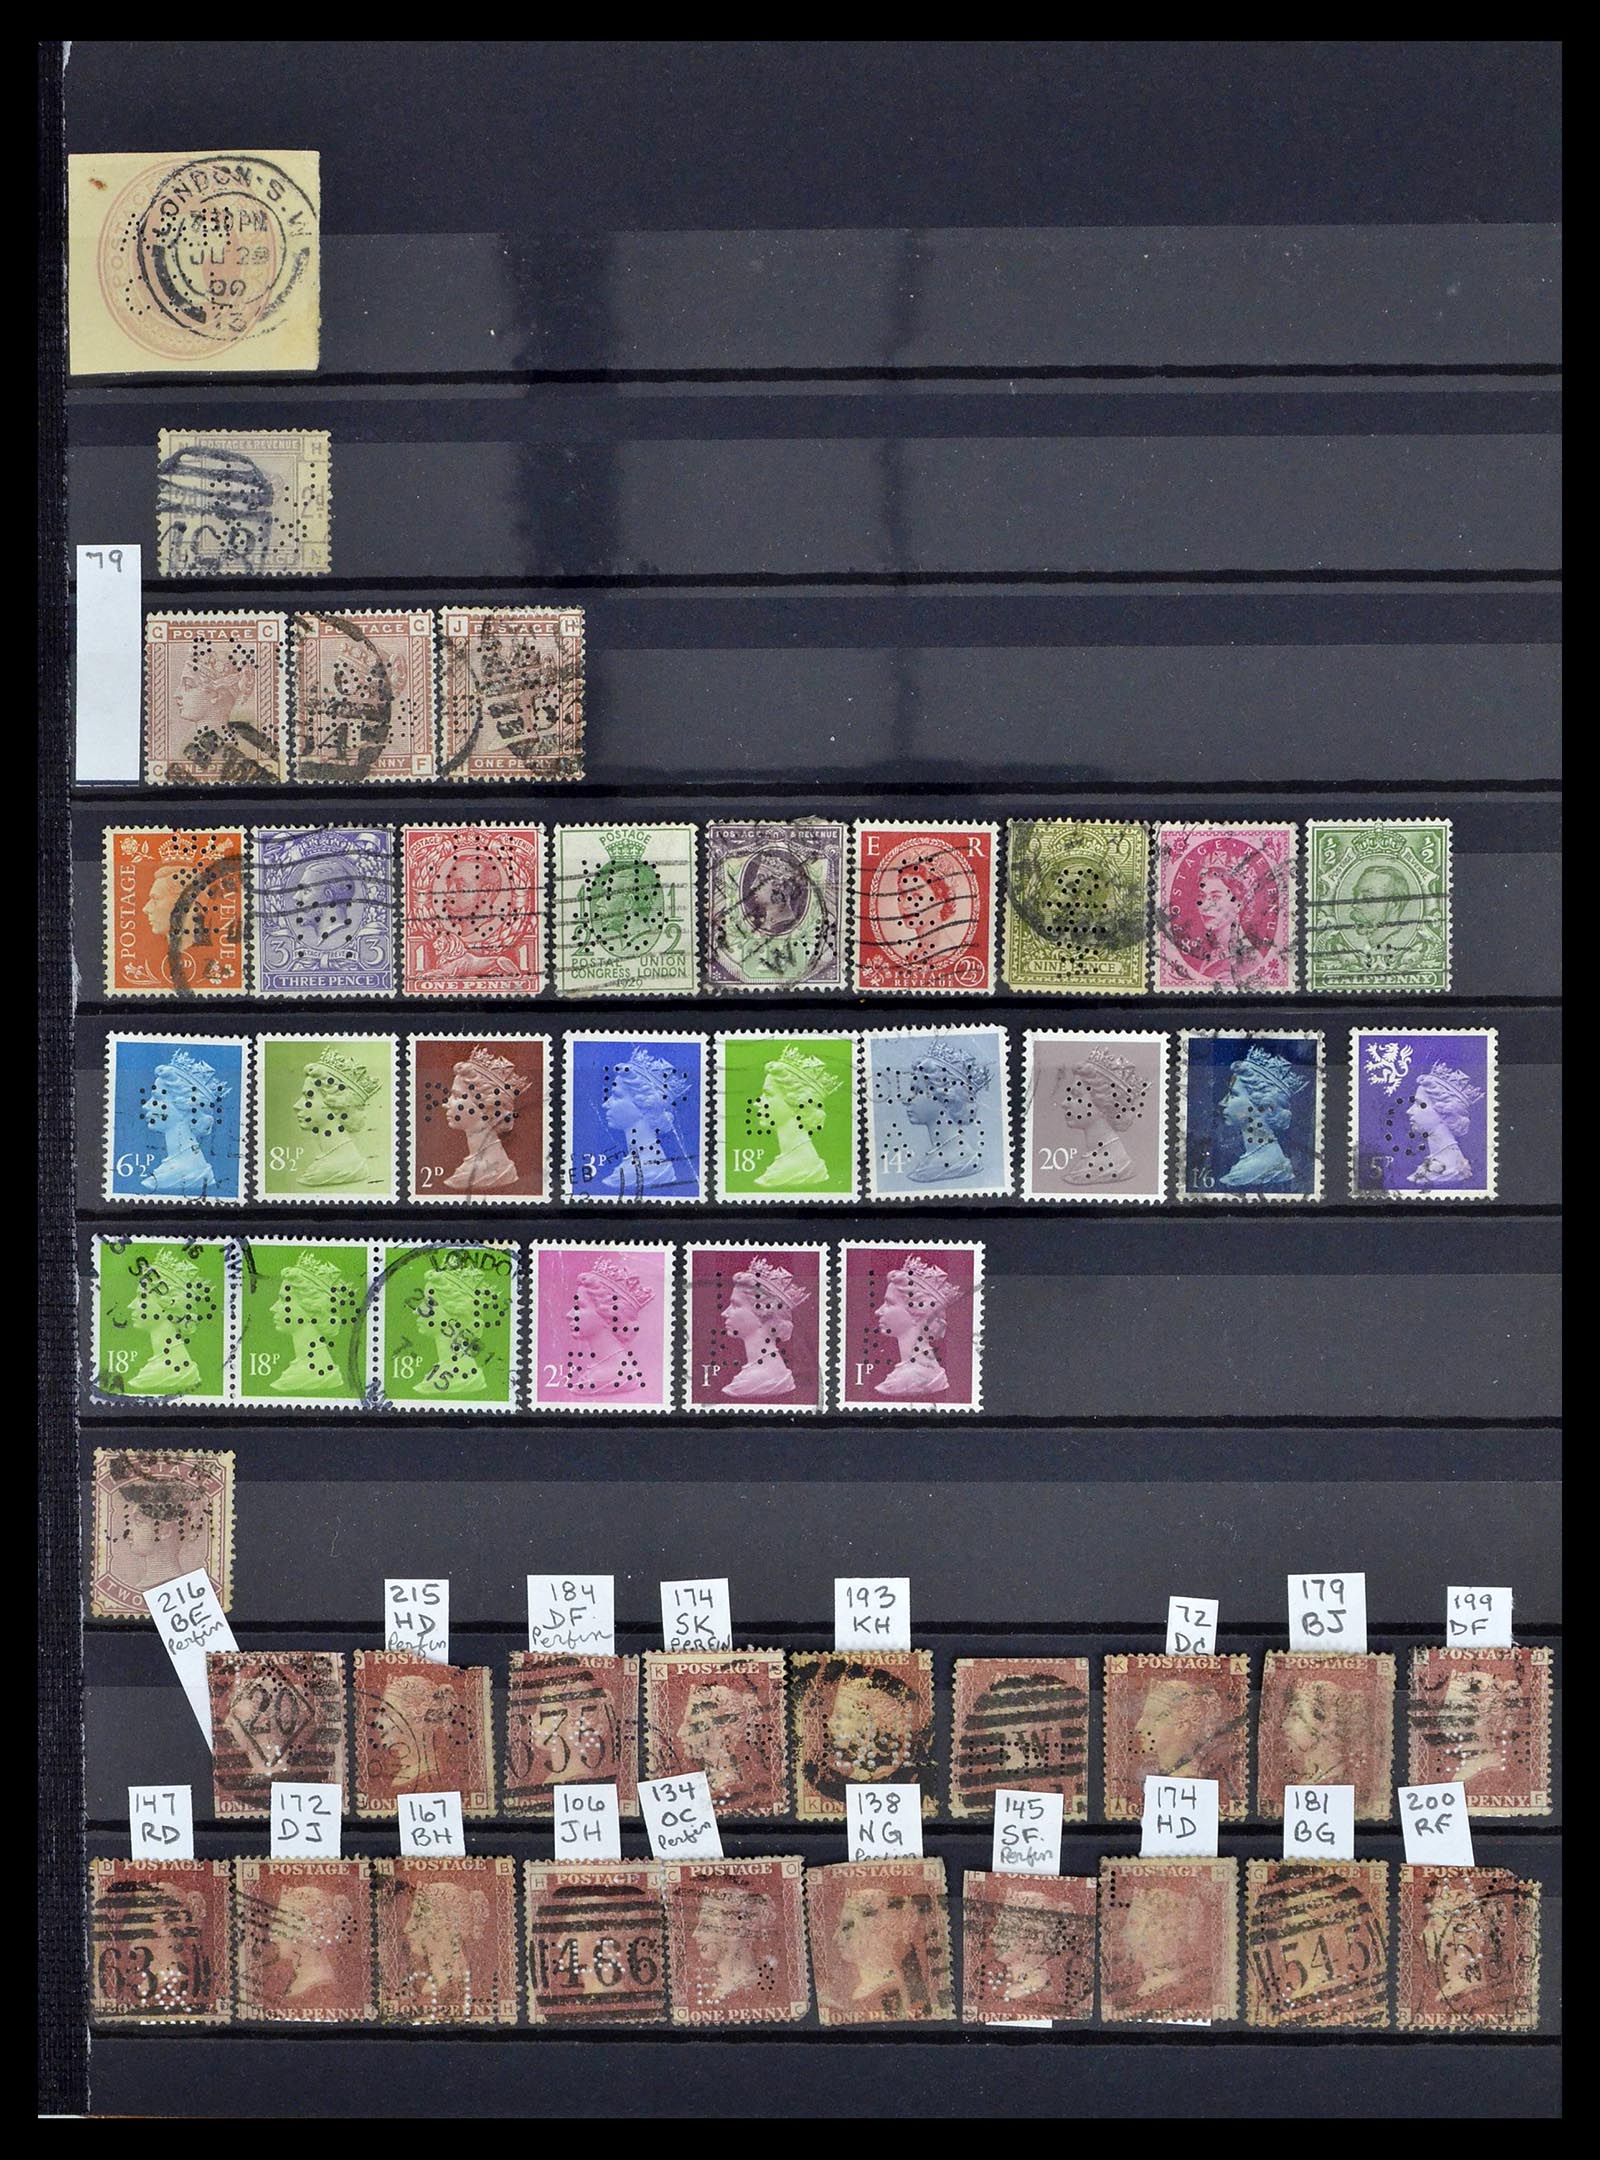 39196 0122 - Stamp collection 39196 Great Britain 1844-1955.